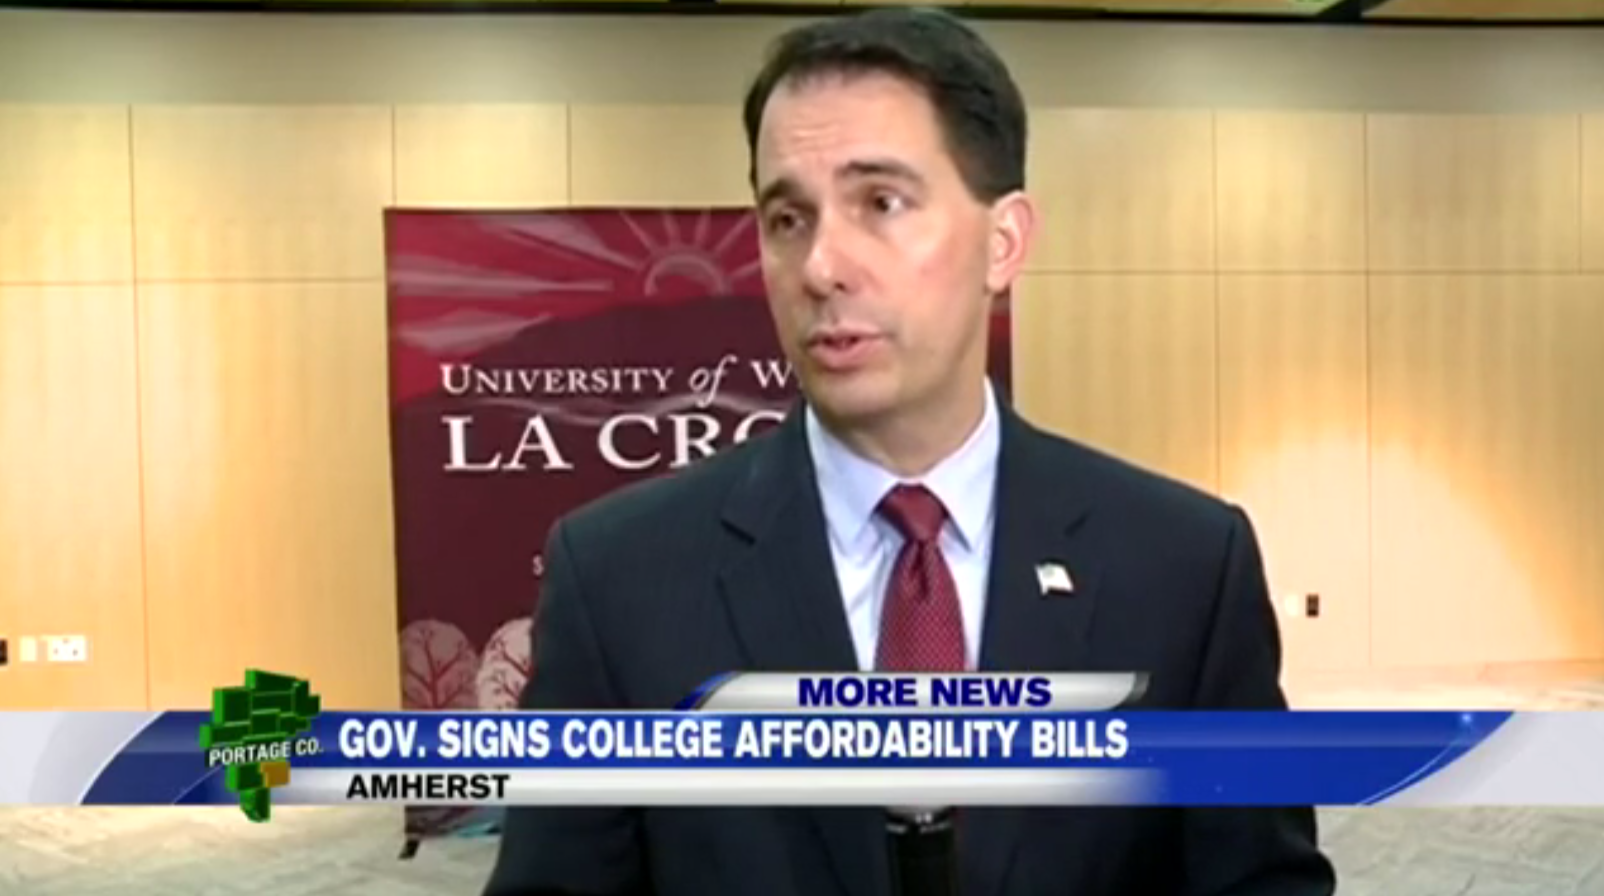 Governor Scott Walker signs college affordability laws (WSAW)